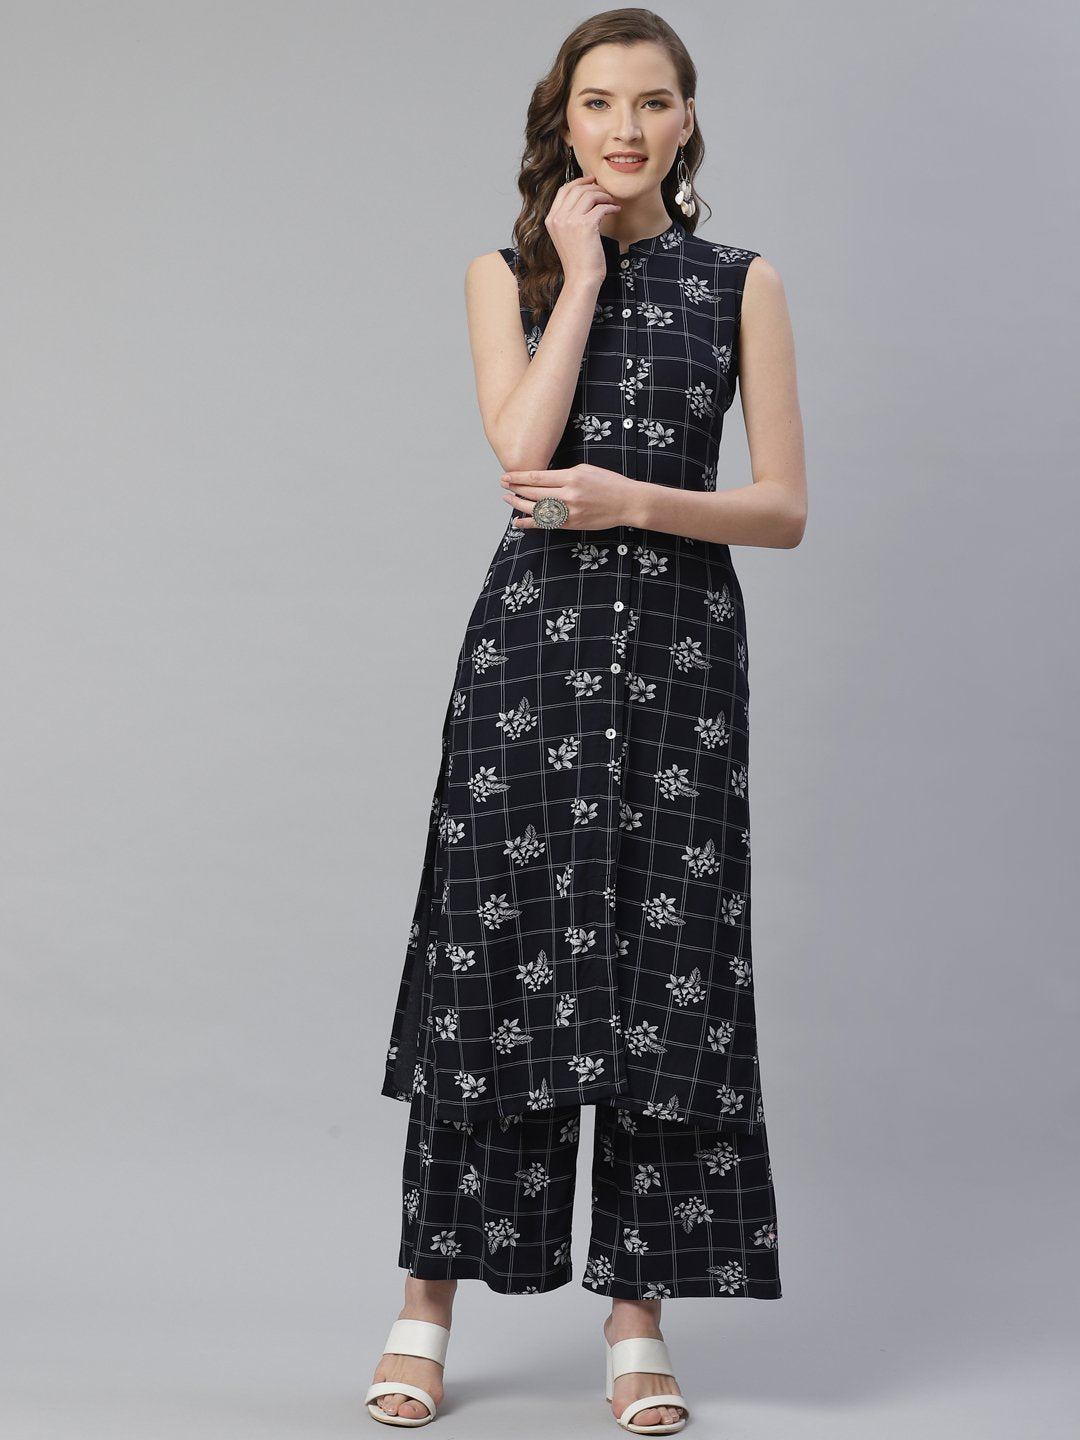 Women's Black & White Floral Printed Kurta with Palazzos - Jompers